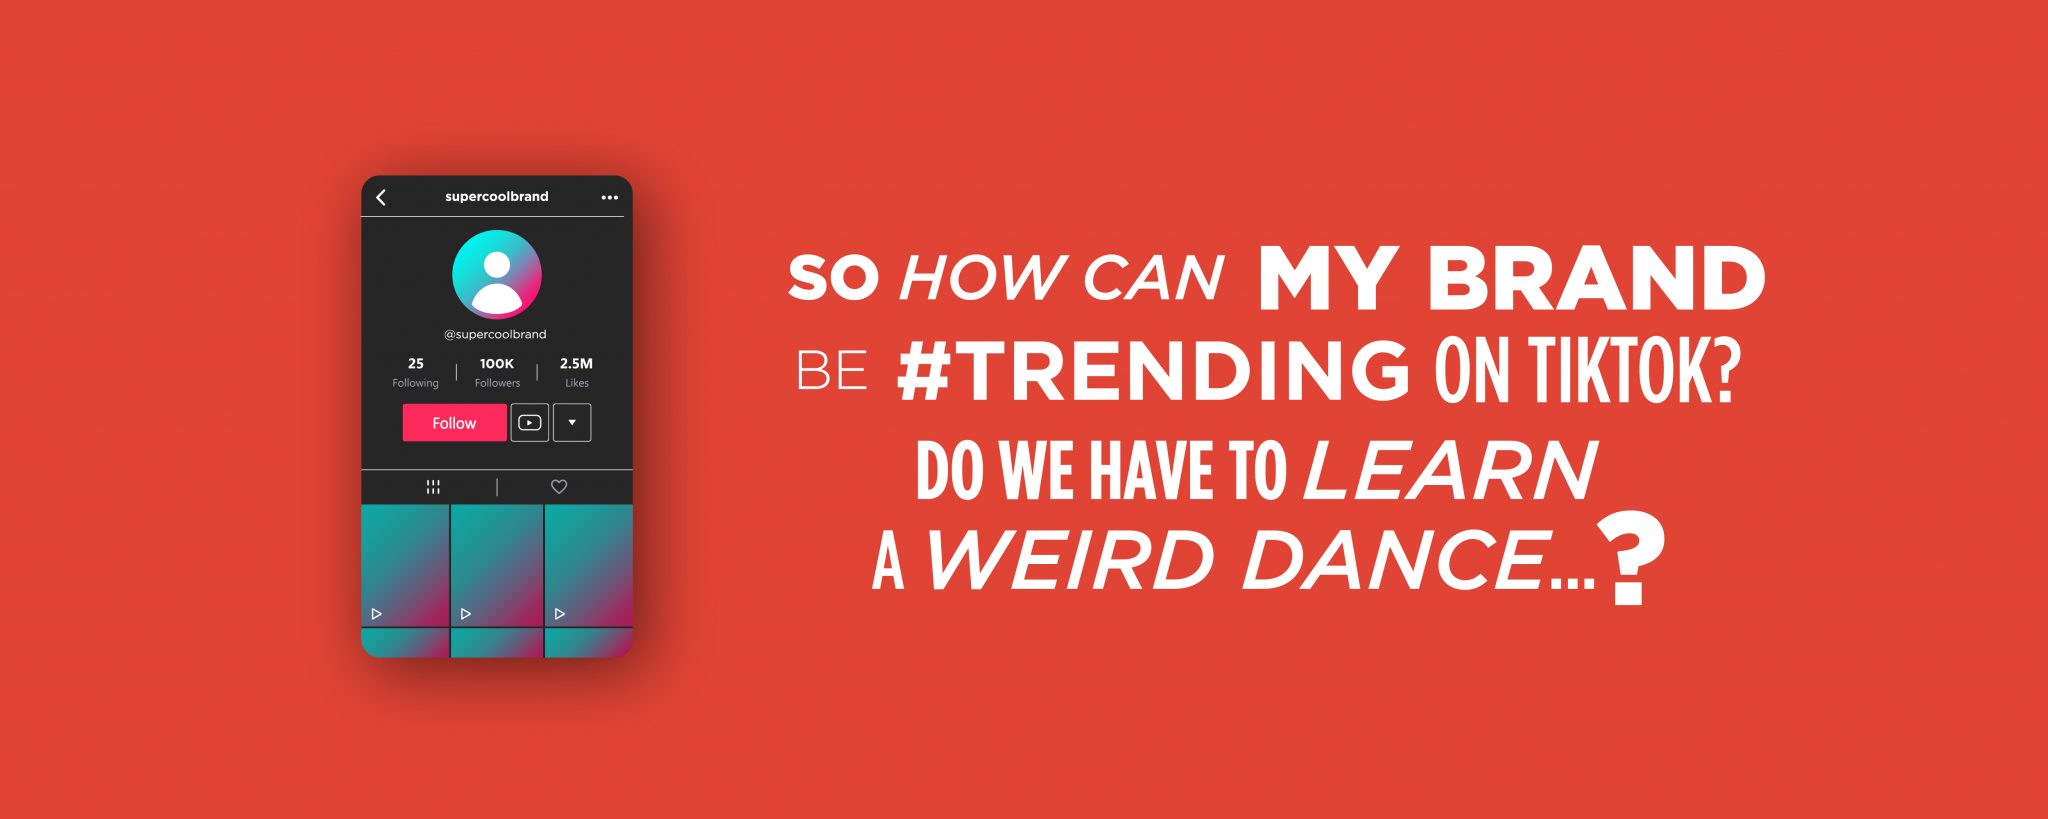 Red graphic with text that reads: So how can my brand be #trending on TikTok? Do we have to learn a weird dance...?